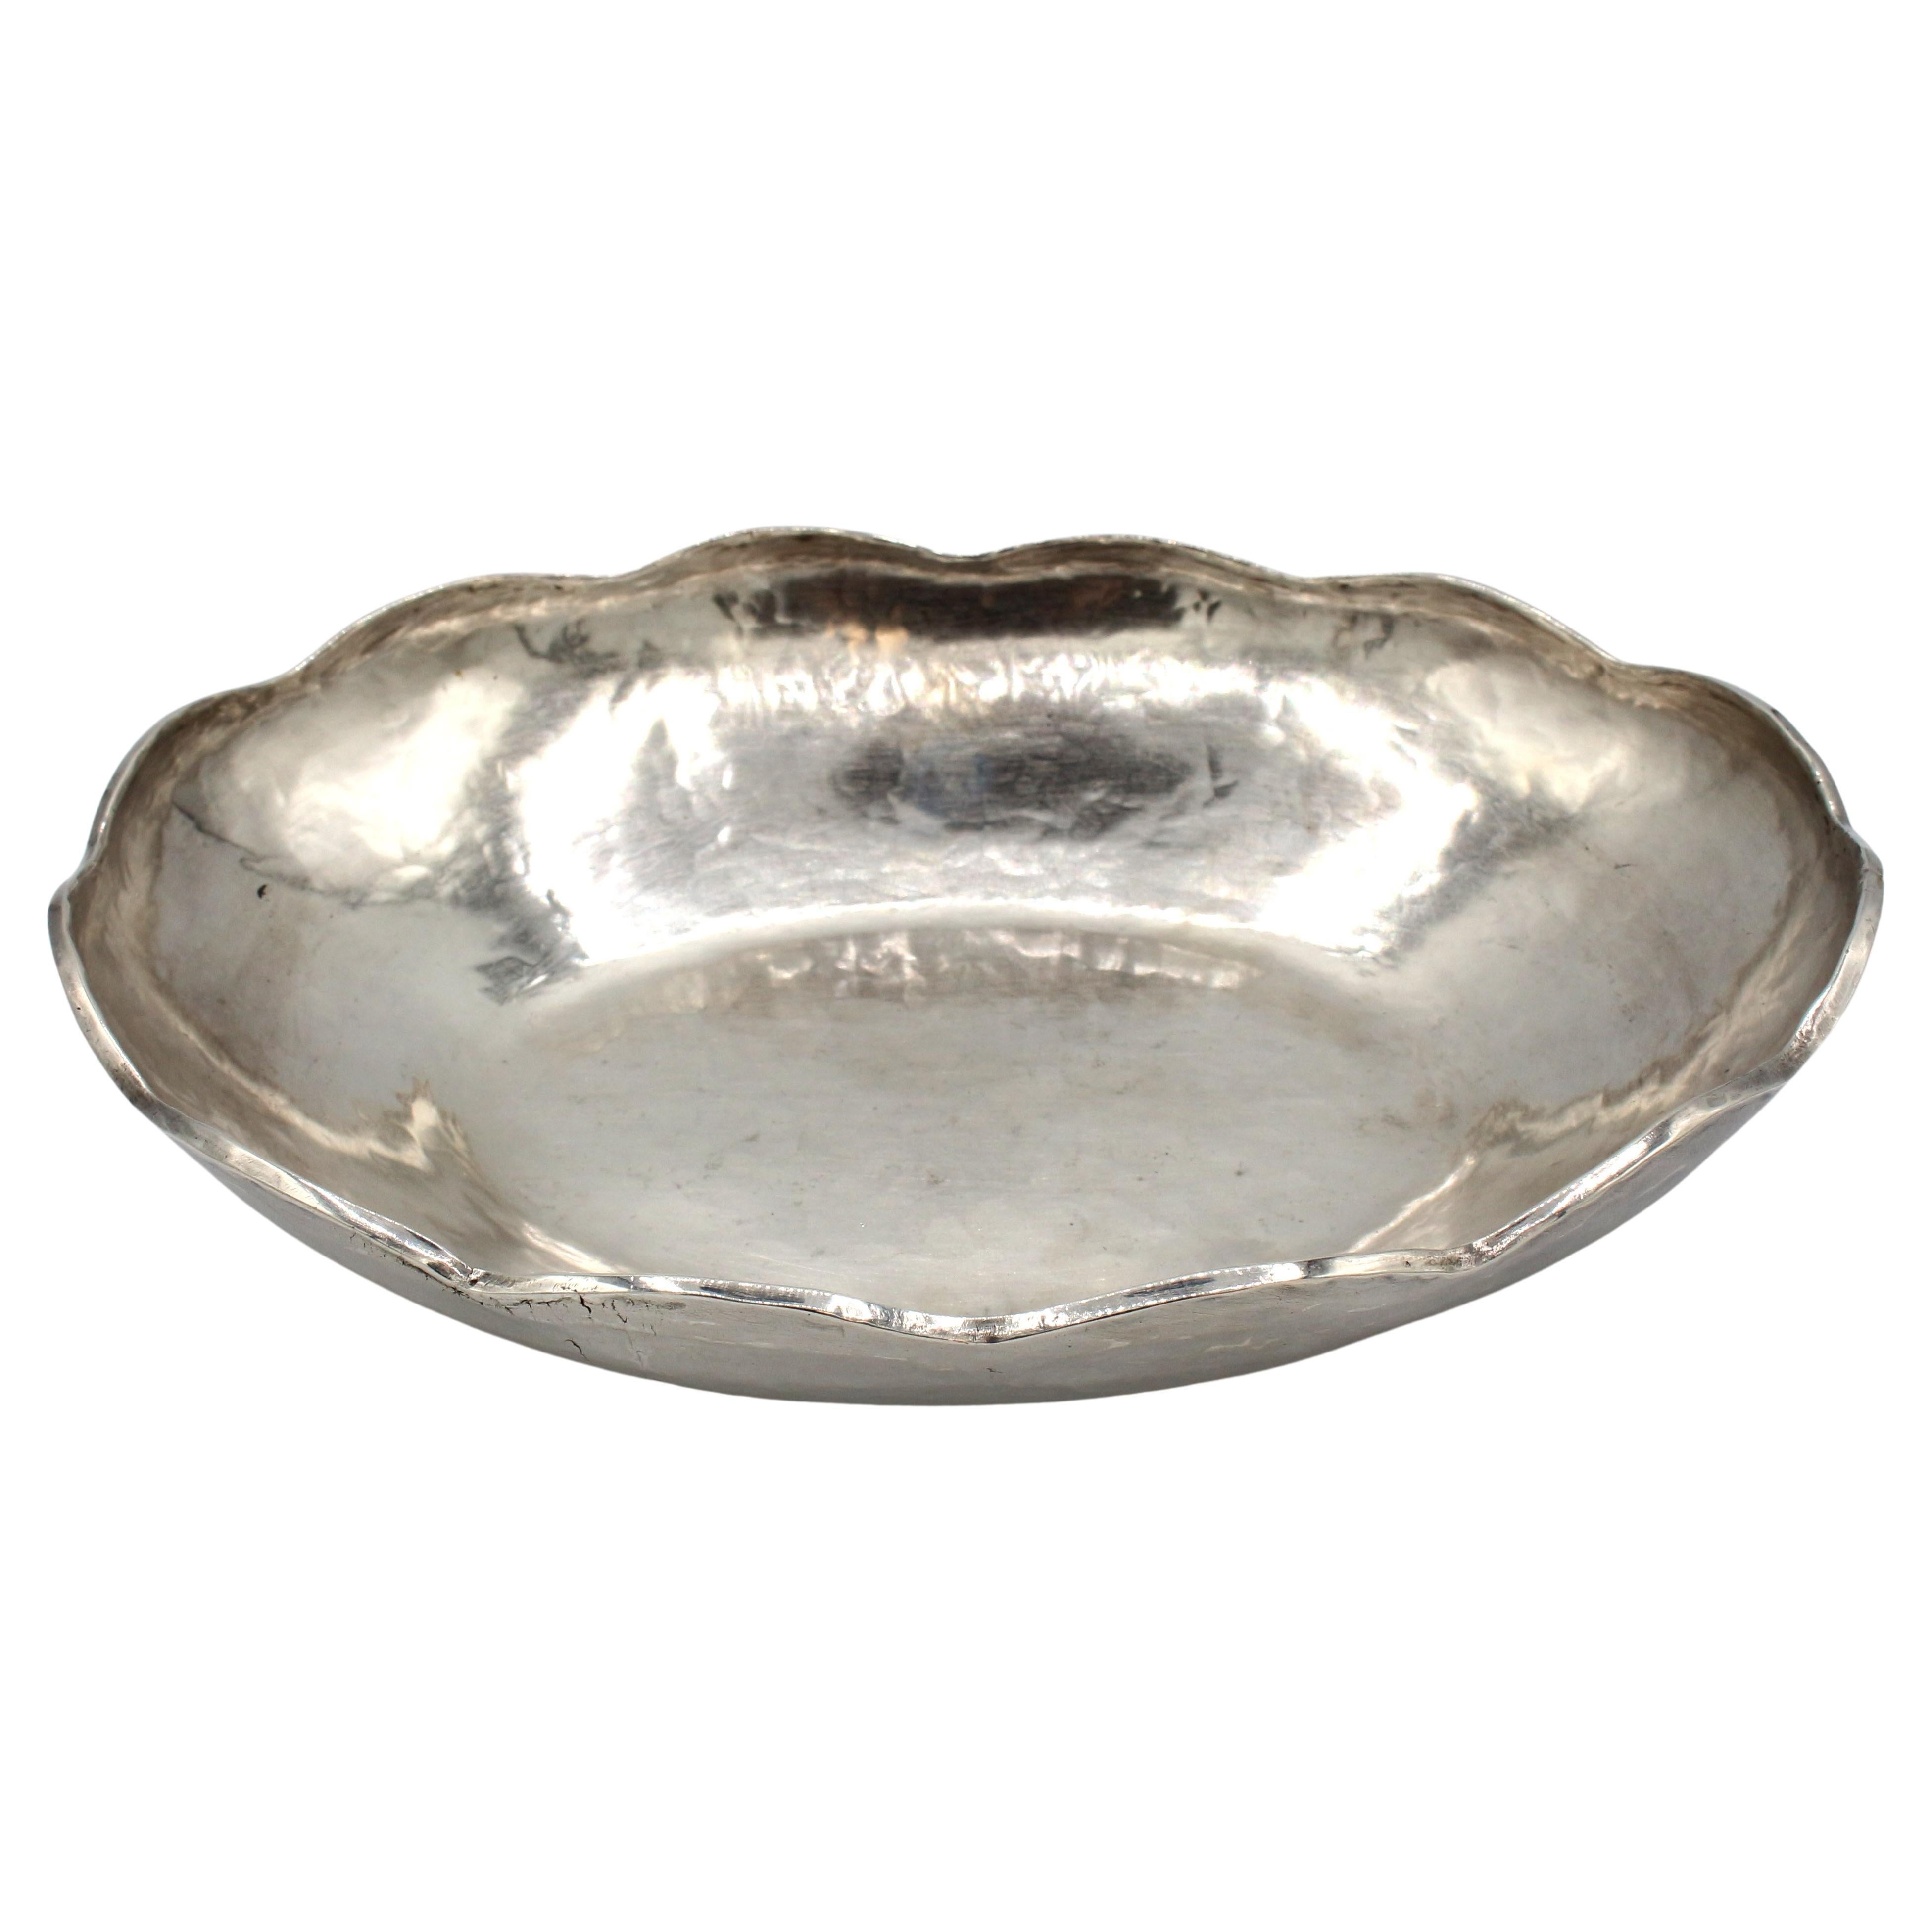 Hammered Sterling Silver Oval Lobed Bowl, Peru c. 1960s-70s